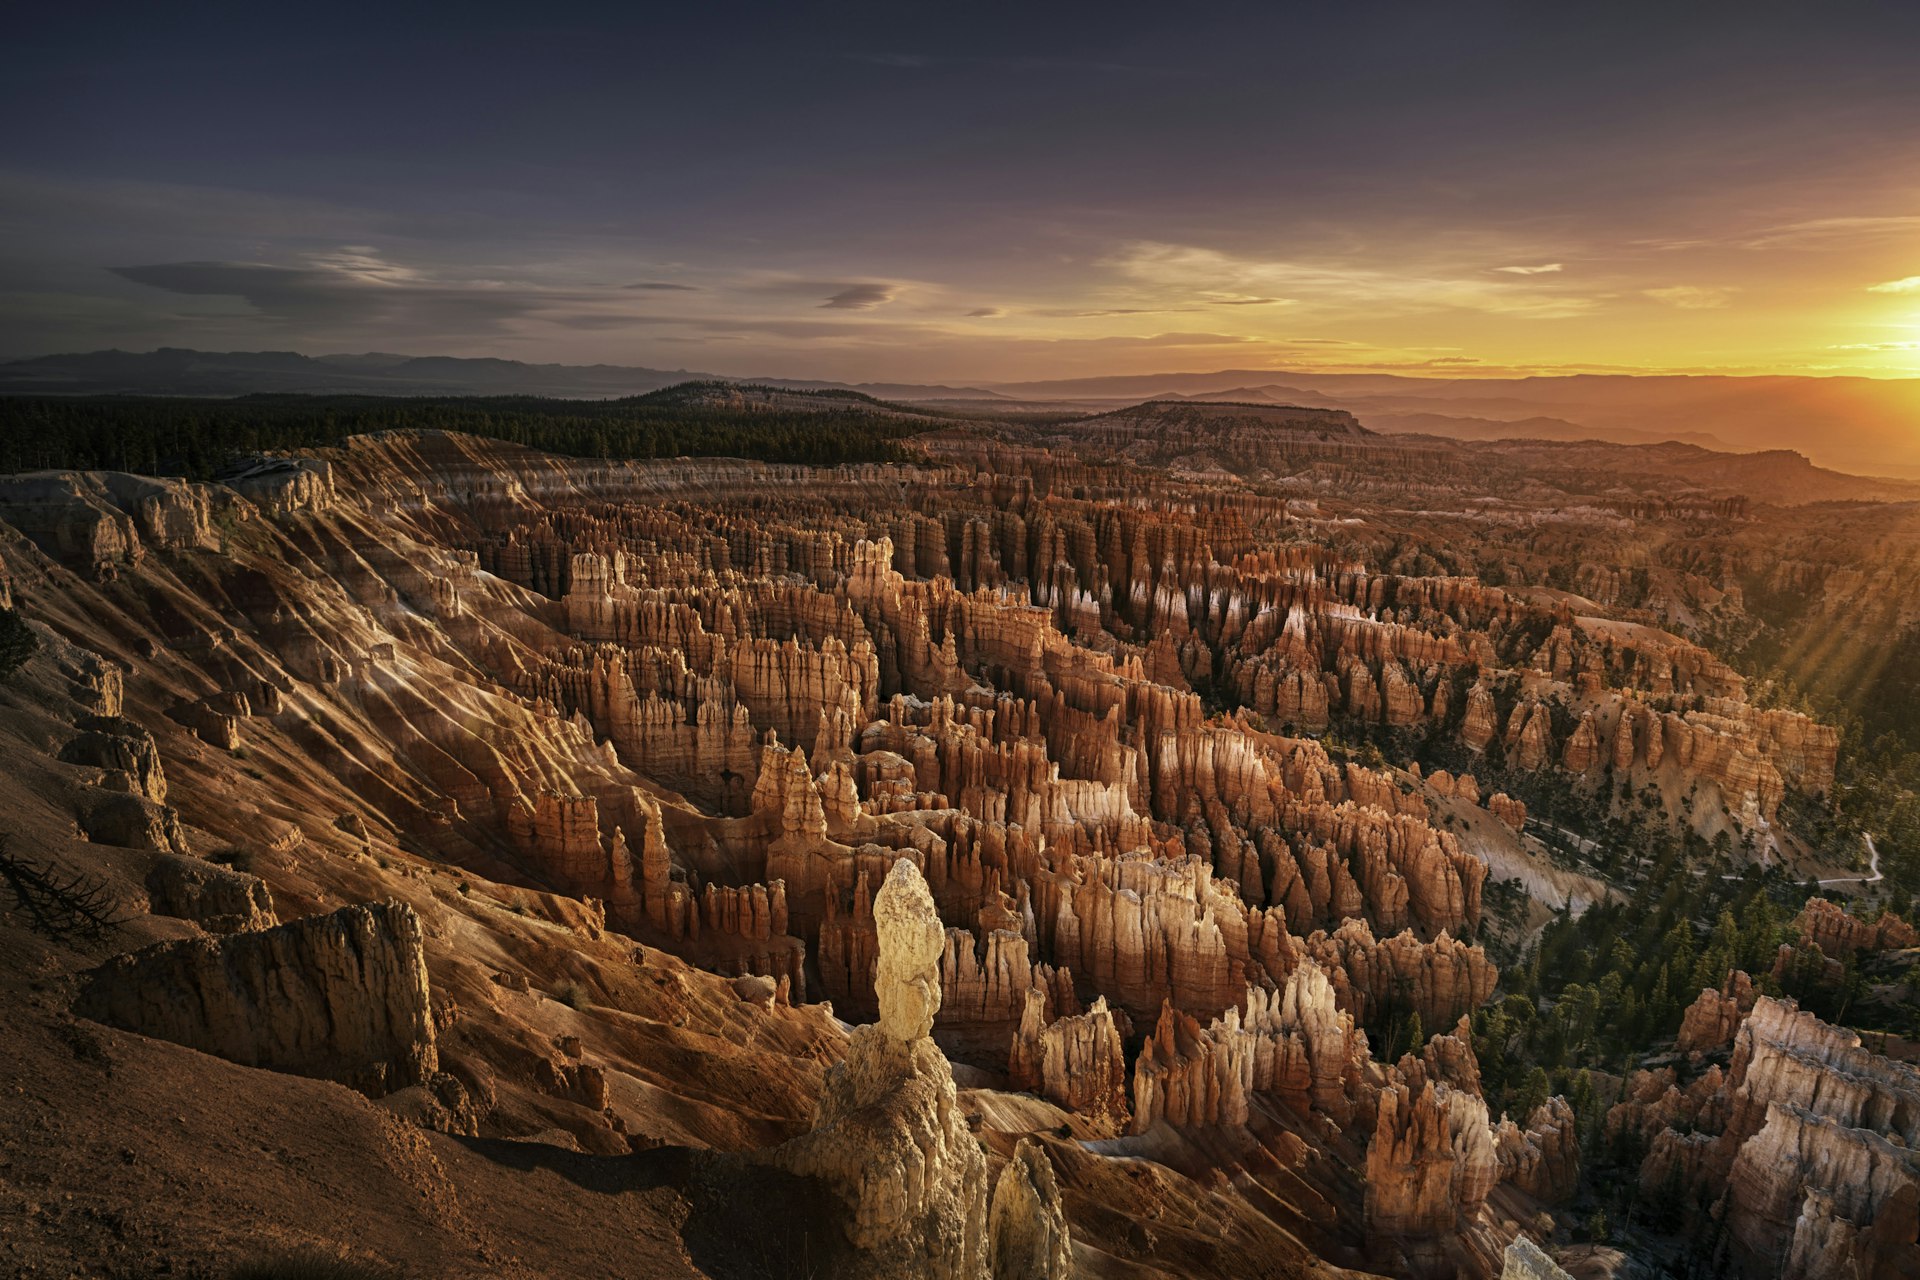 Sunrise over the amphitheater at Bryce Canyon, as seen from Inspiration Point. 